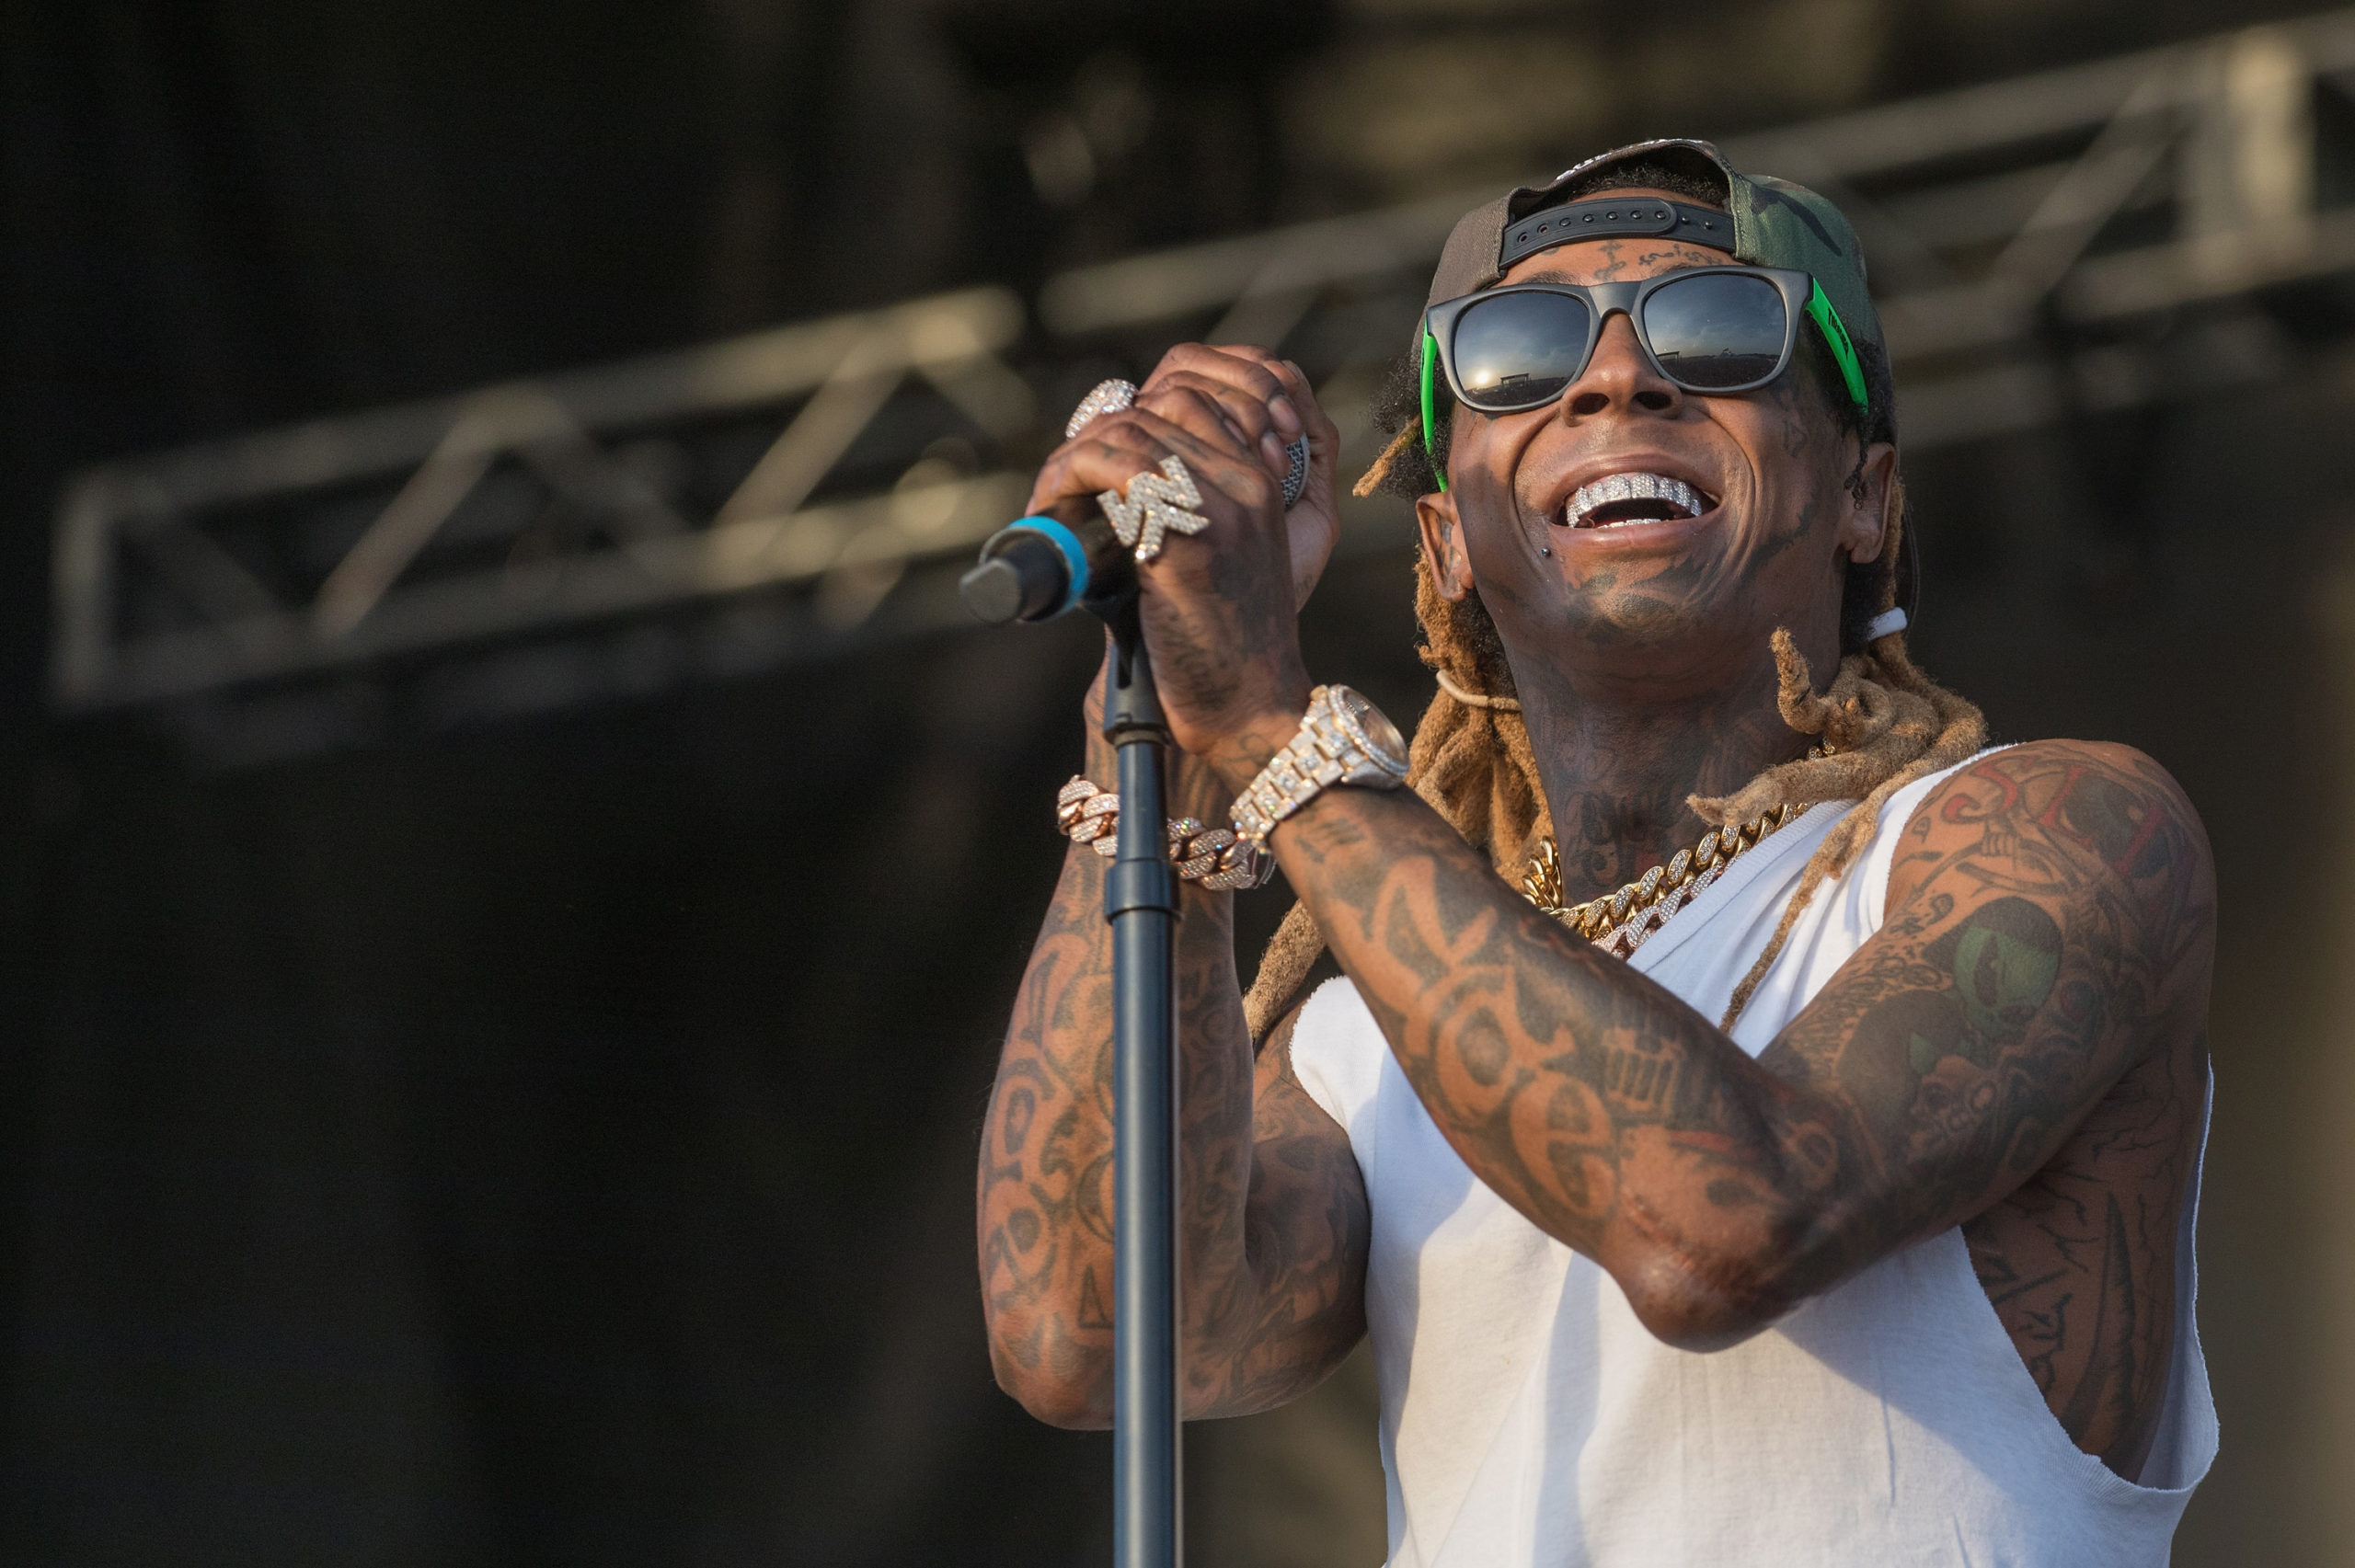 MARTINDALE, TX - JULY 21:  Rapper Lil Wayne performs onstage during day one of Float Fest at Cool River Ranch on July 21, 2018 in Martindale, Texas.  (Photo by Rick Kern/WireImage)